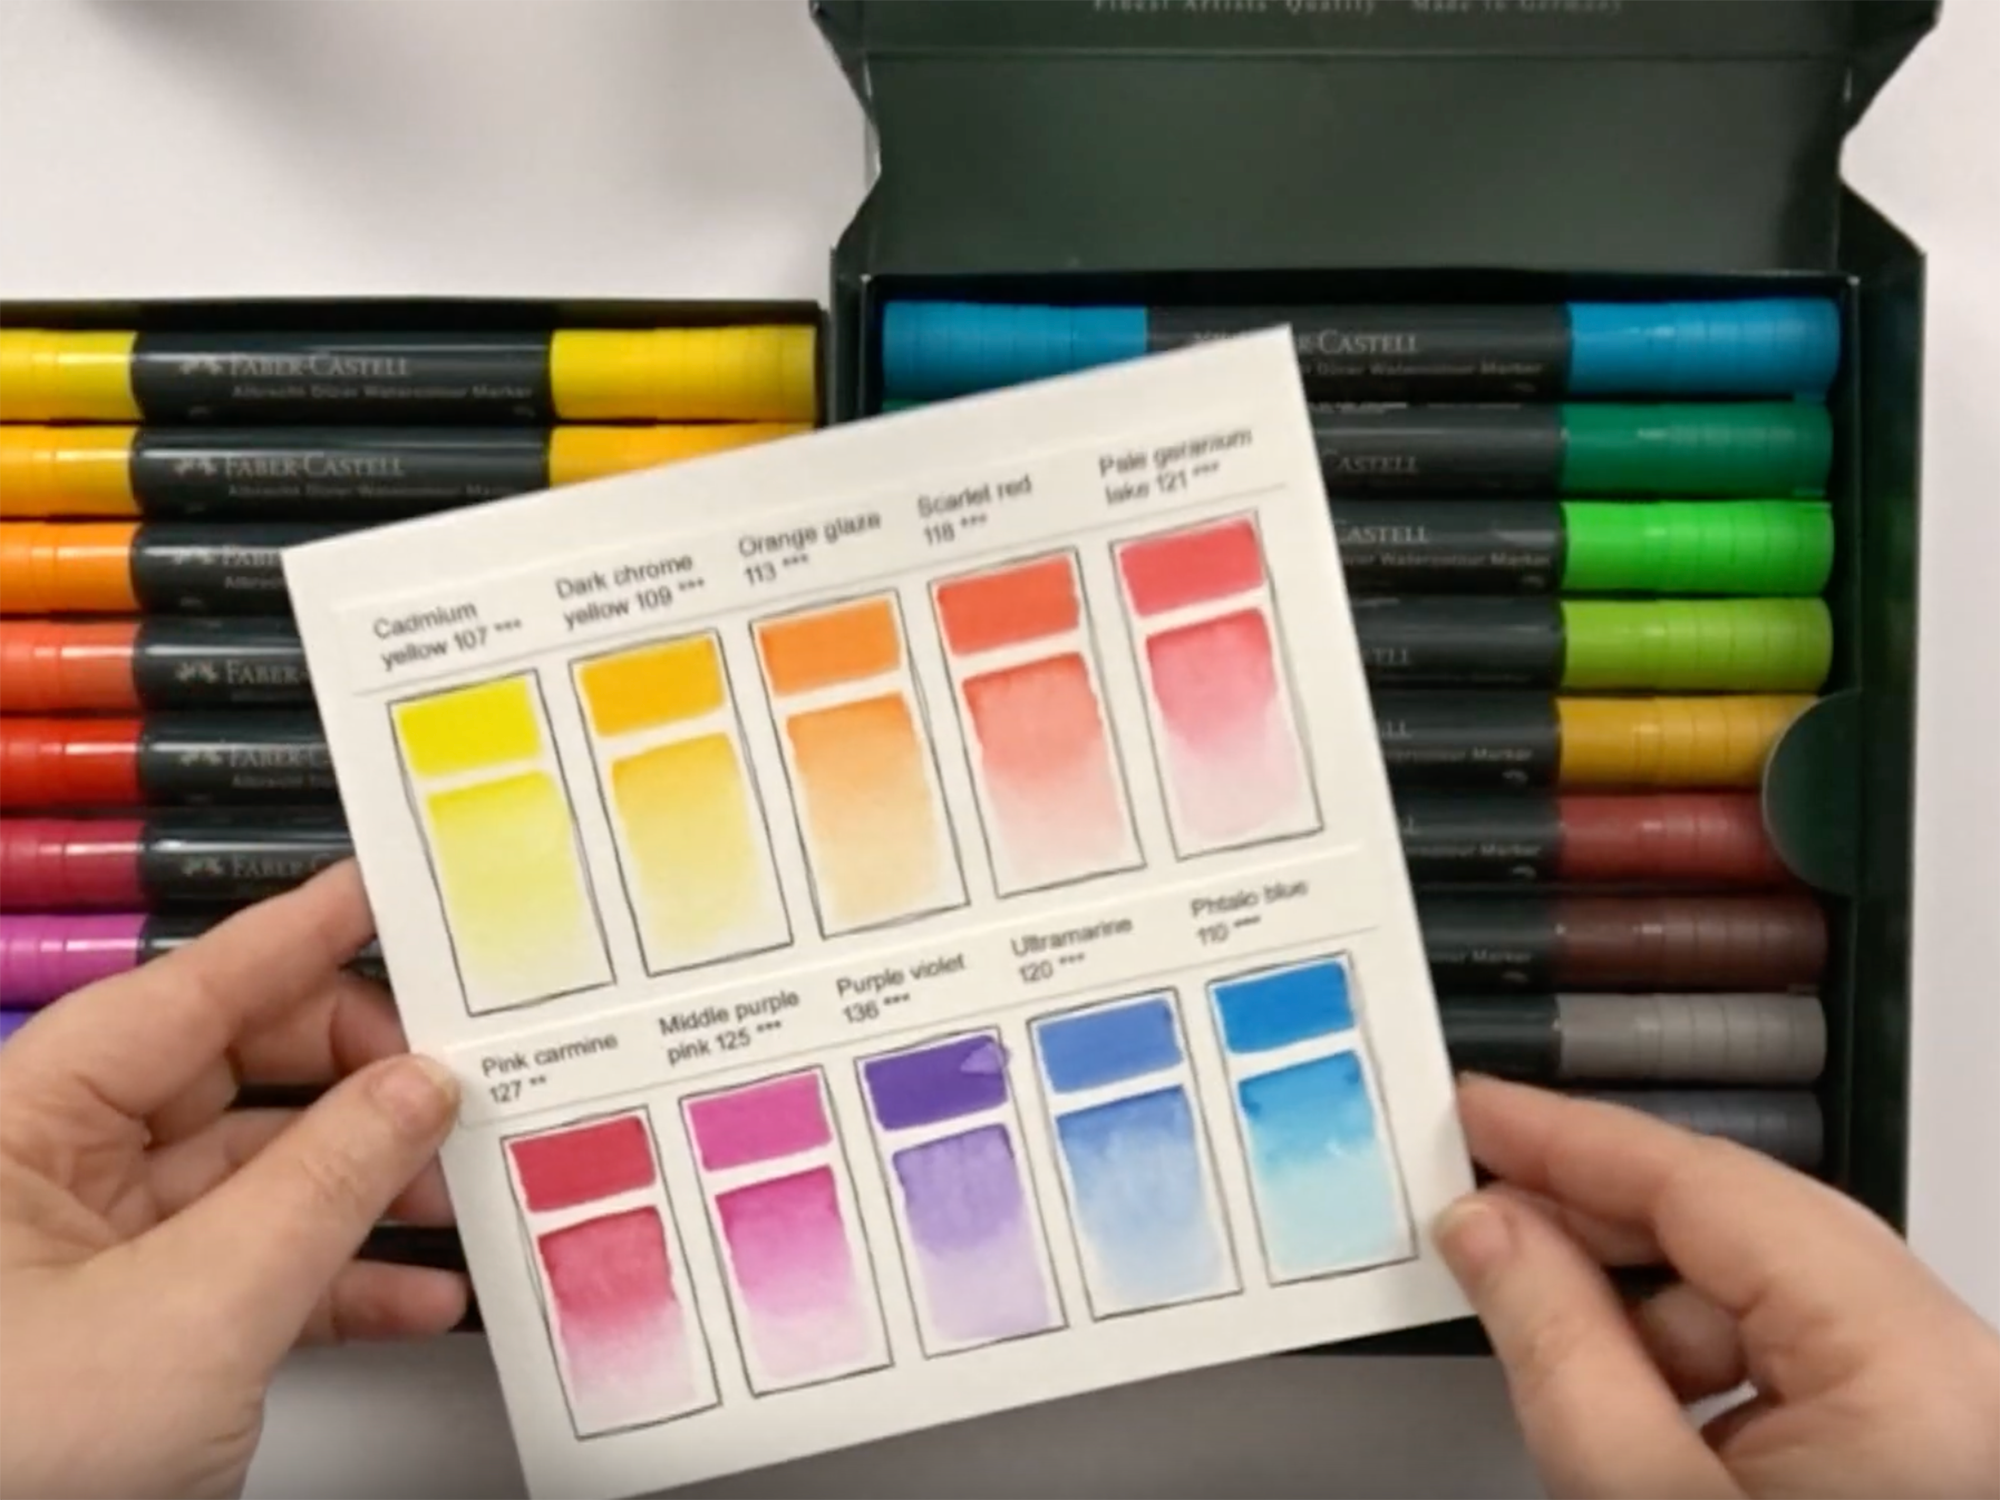 Faber Castell products including watercolour markers - Liz Steel